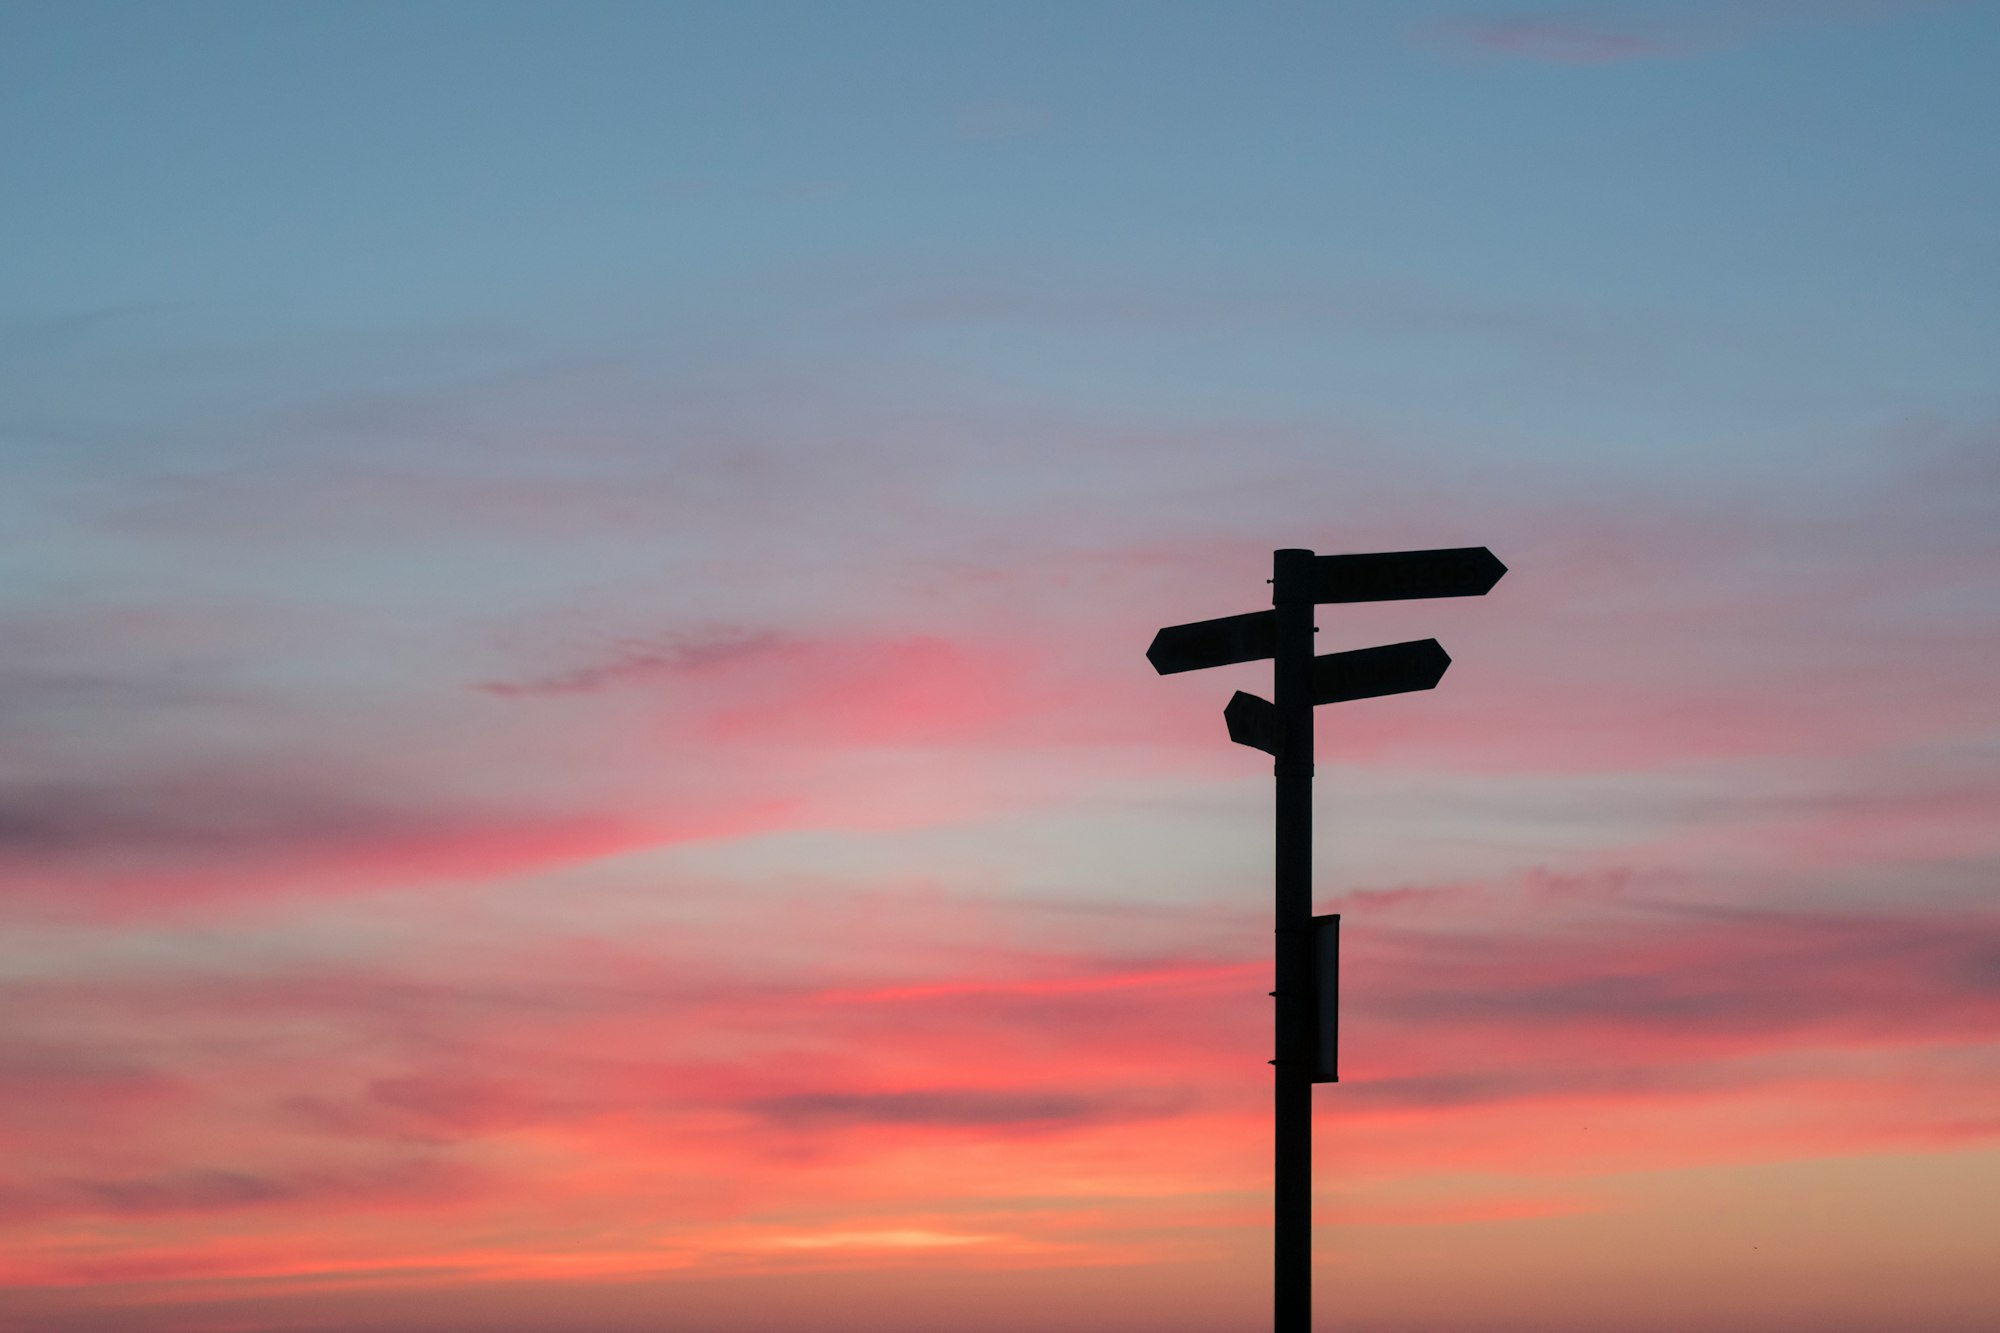 Silhouette of a multiple directions on a sign post against a colorful sky during sunset or sunrise